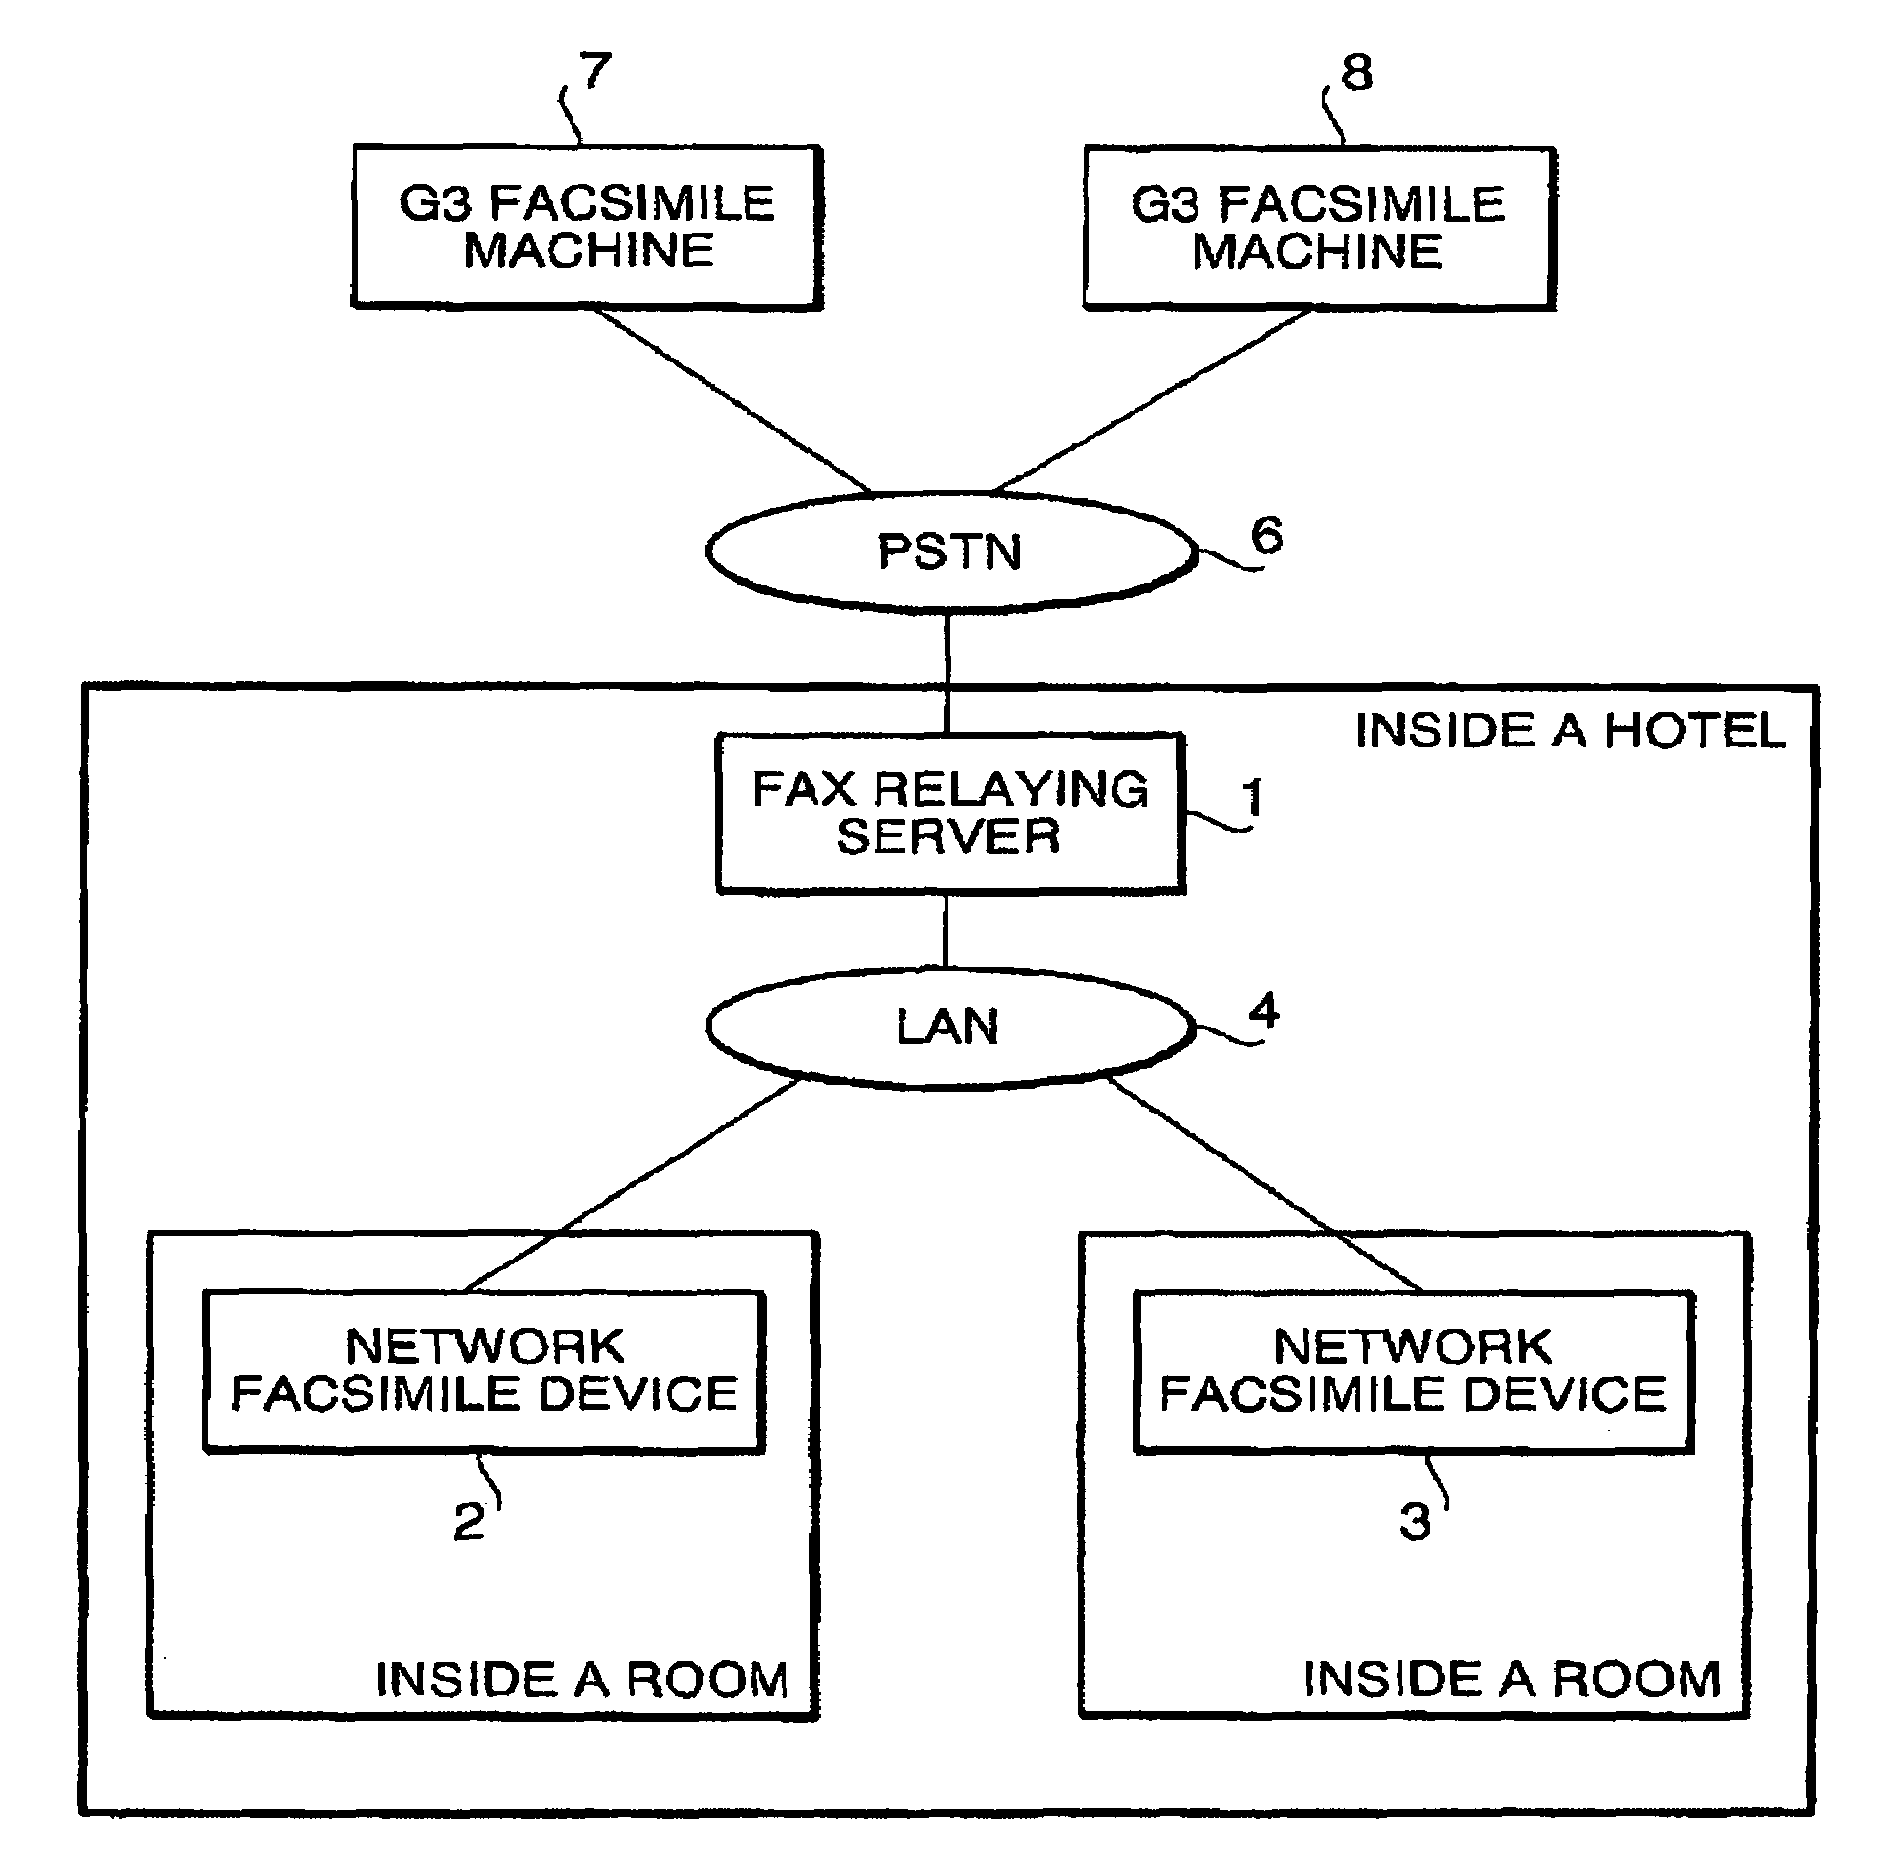 Network facsimile system with relaying server